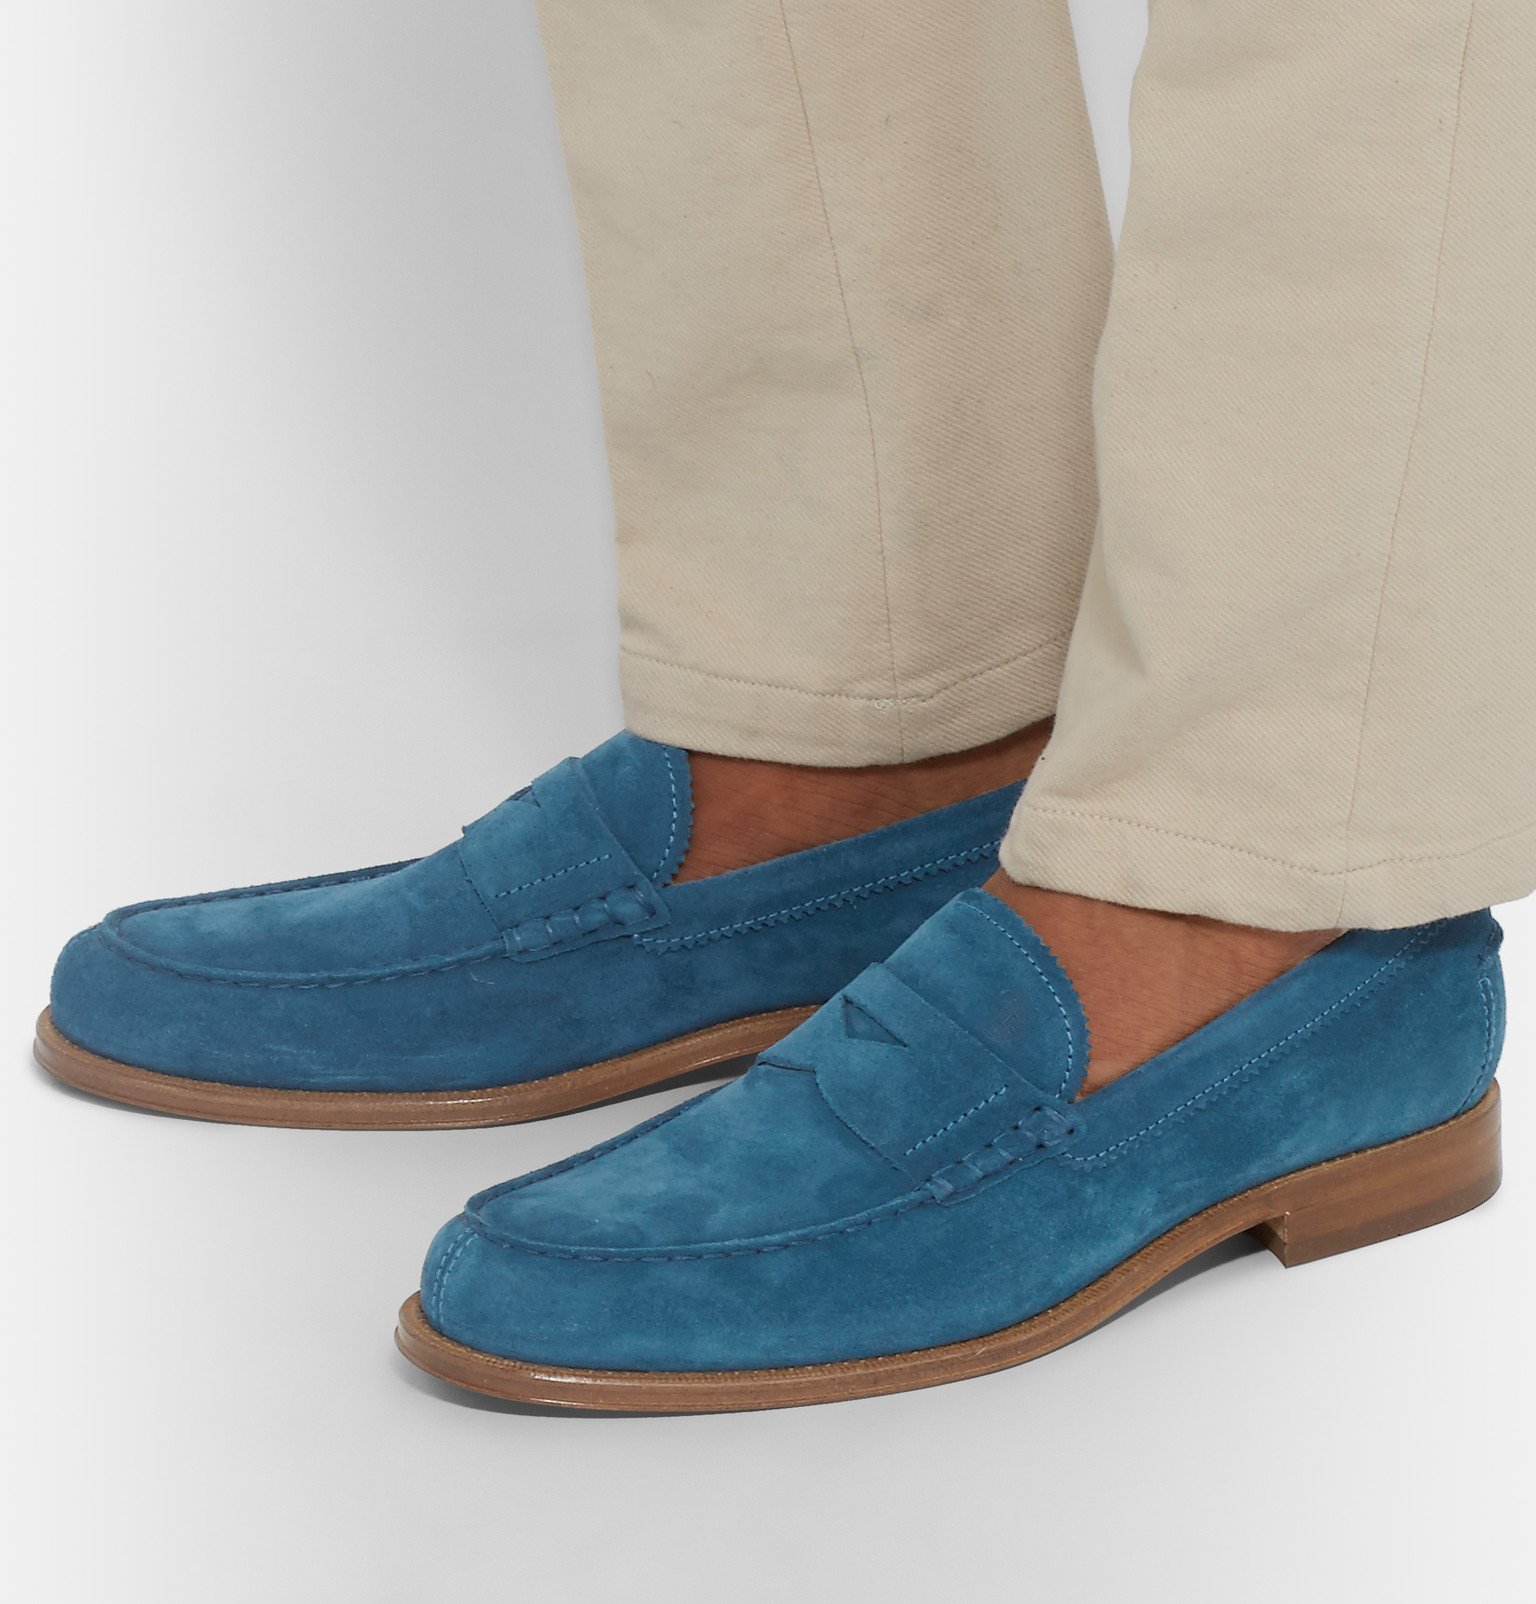 Tod's Suede Penny Loafers in Blue for Men - Lyst